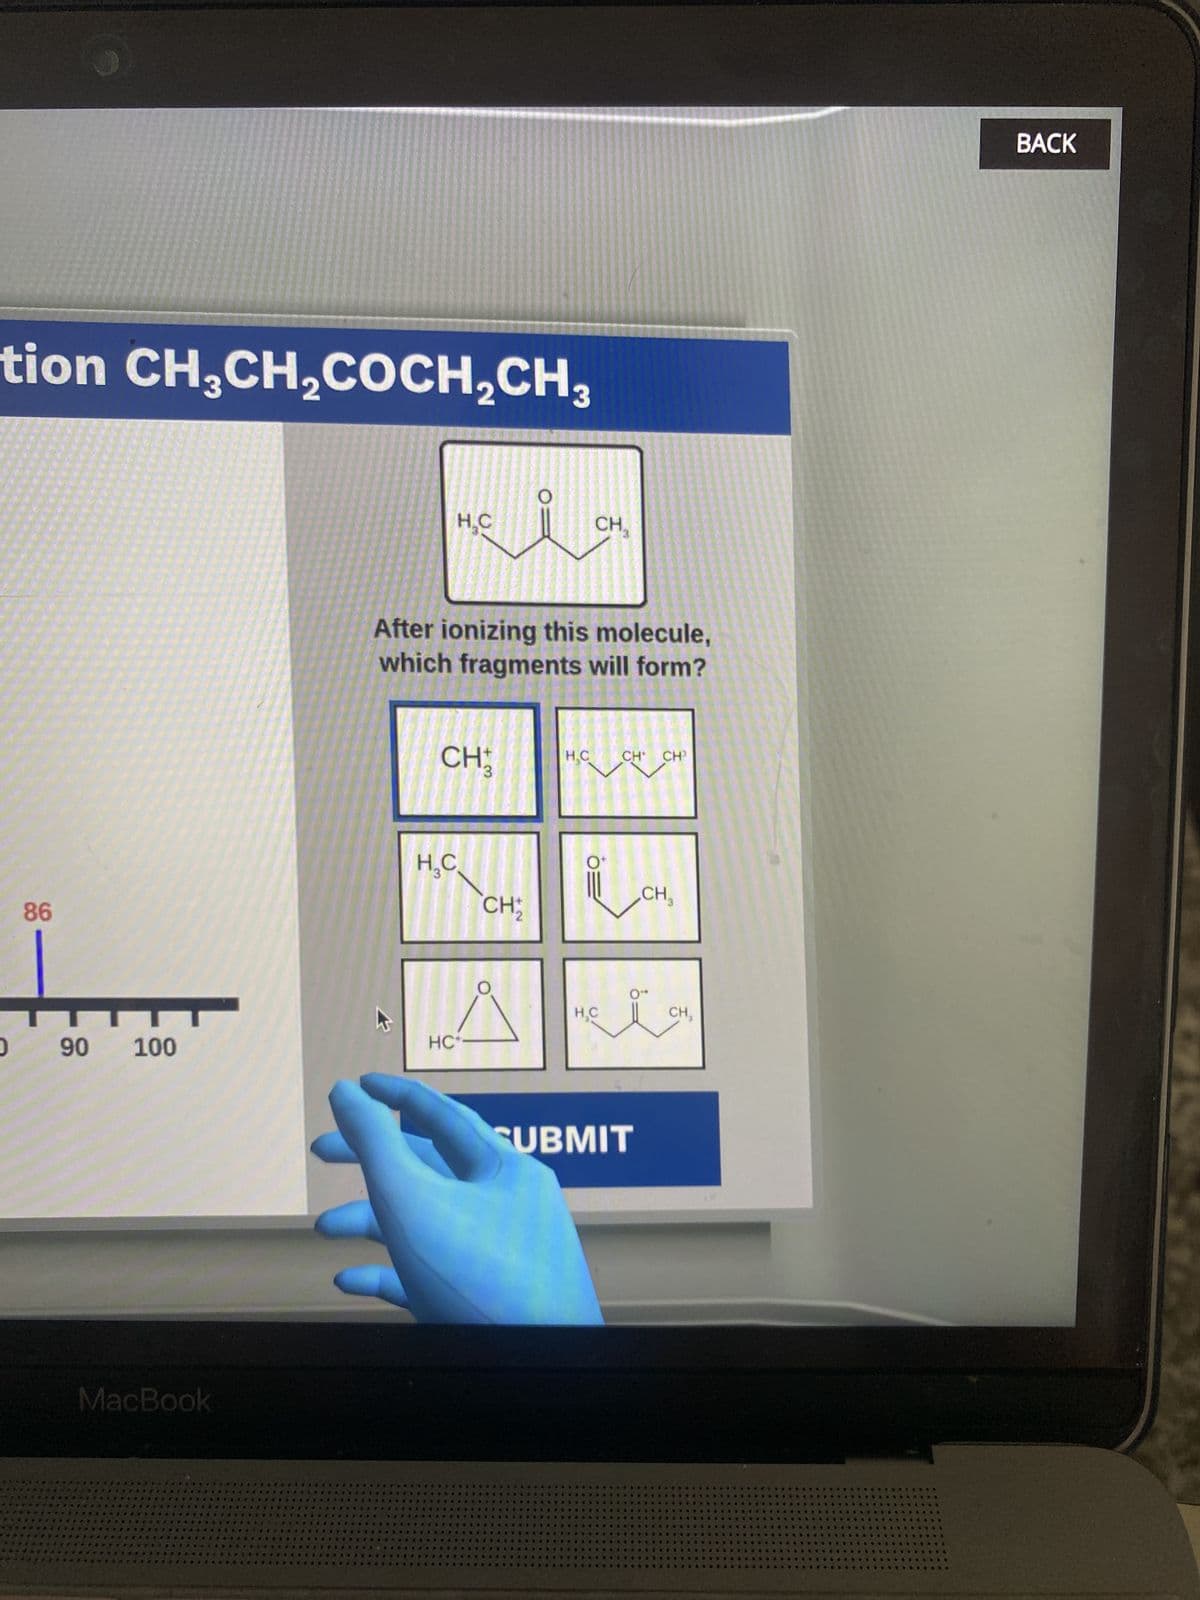 C
98
tion CH3CH2COCH2CH3
06
H.C
O
CH
After ionizing this molecule,
which fragments will form?
CH
3
H₂C
CH₁₂
+2
100
HC-
MacBook
8
H.C
CH CH³
.0
CH
0"
H.C
CH,
SUBMIT
400
604
BACK